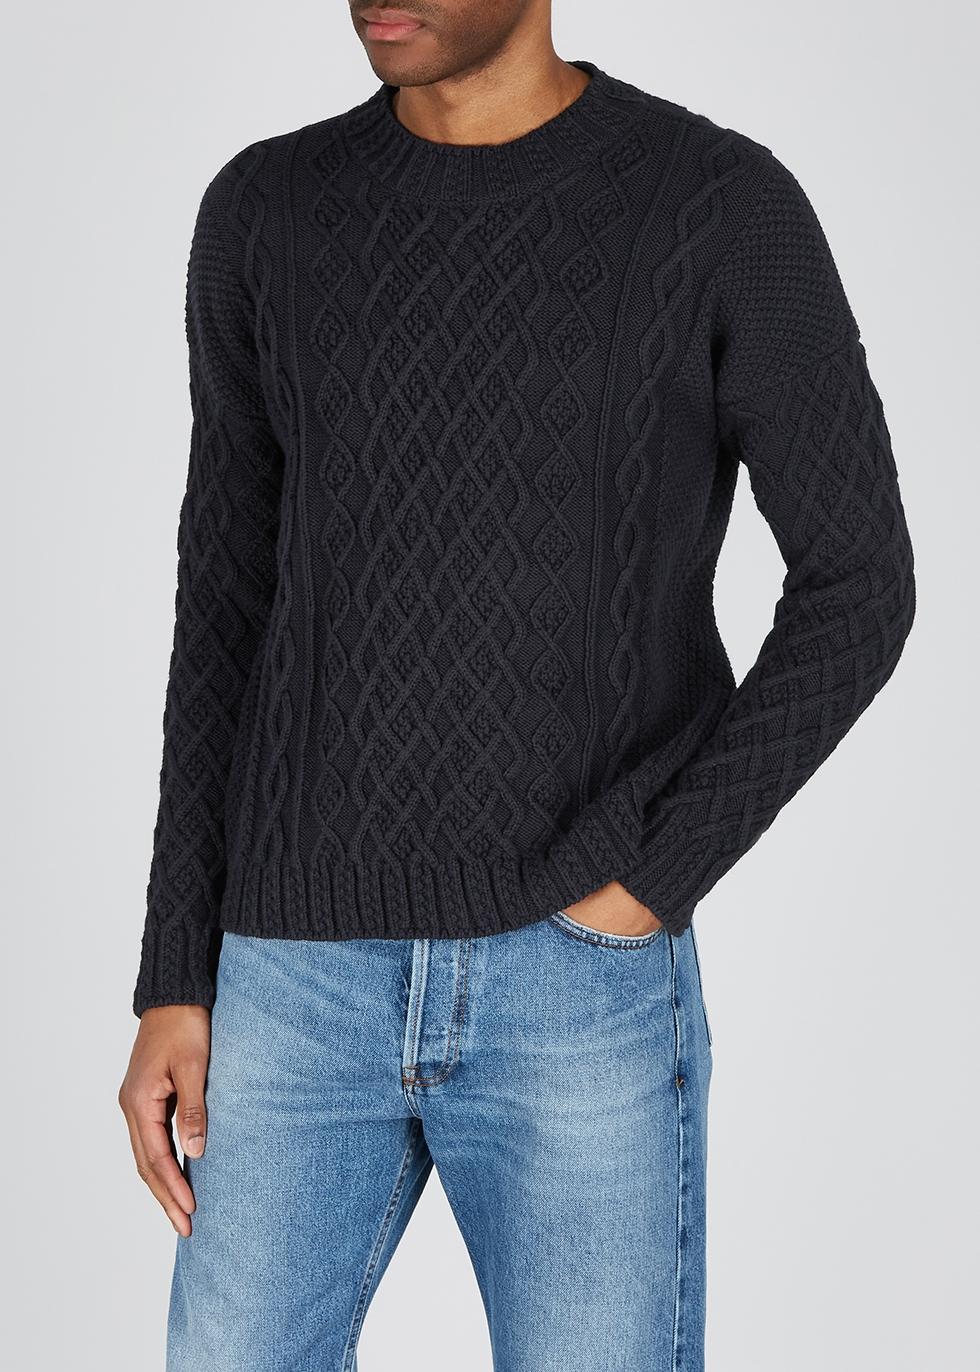 Loewe Navy Cable-knit Cotton Jumper in Blue for Men - Lyst